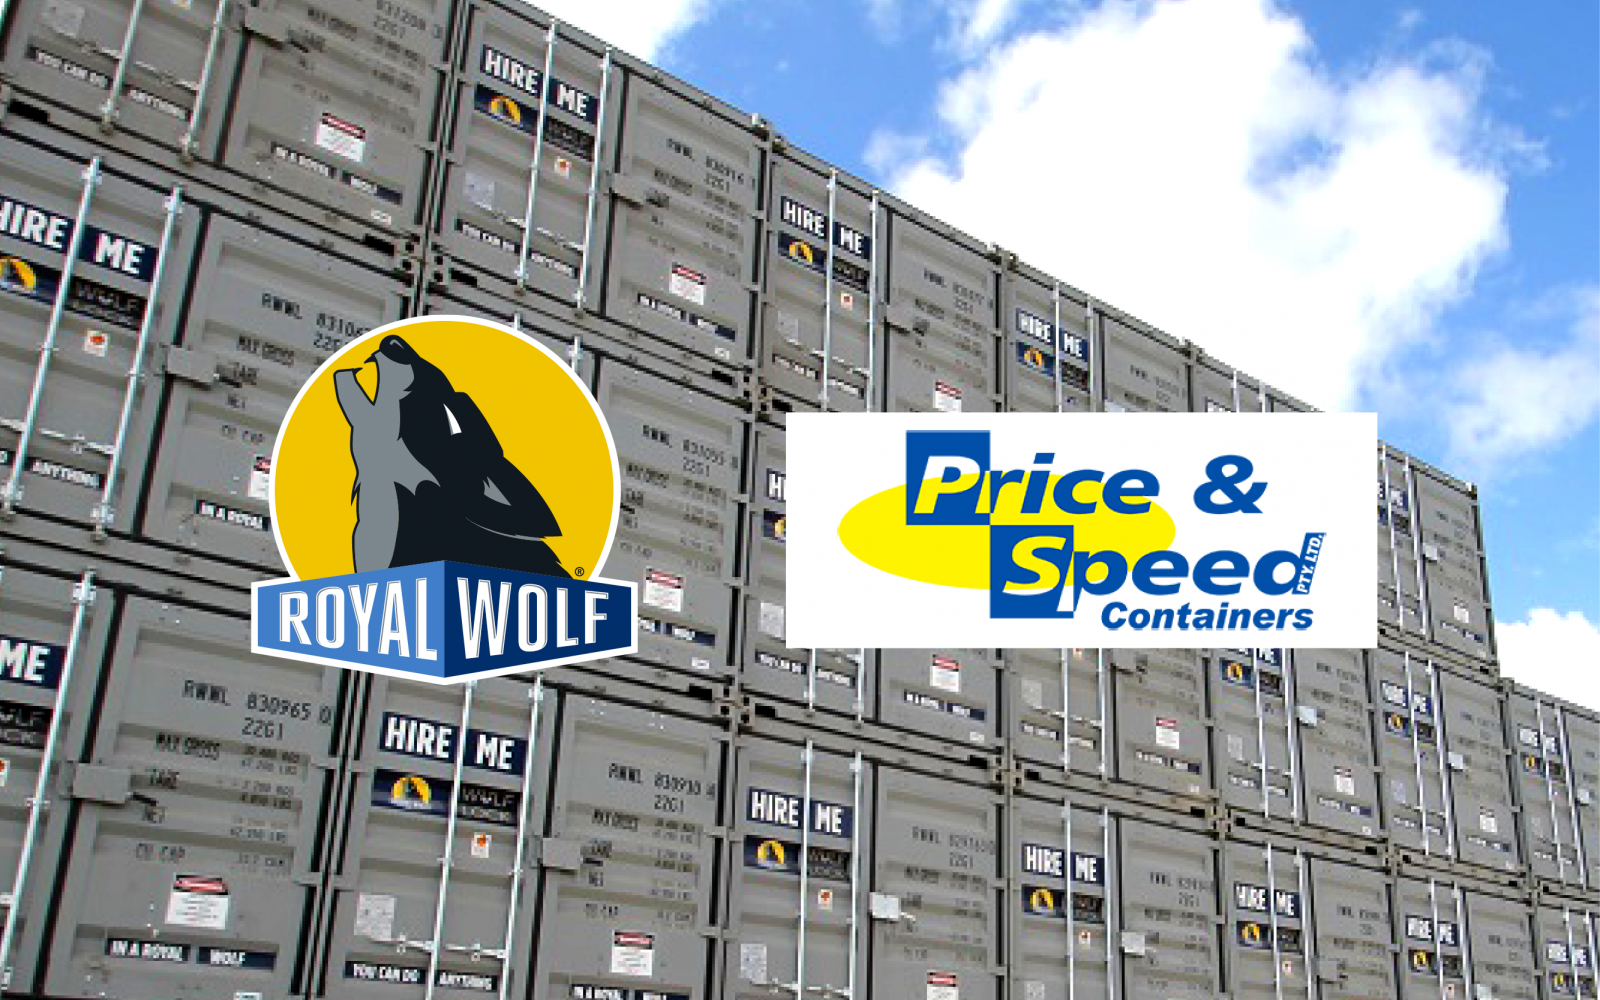 Royal Wolf acquires Price and Speed